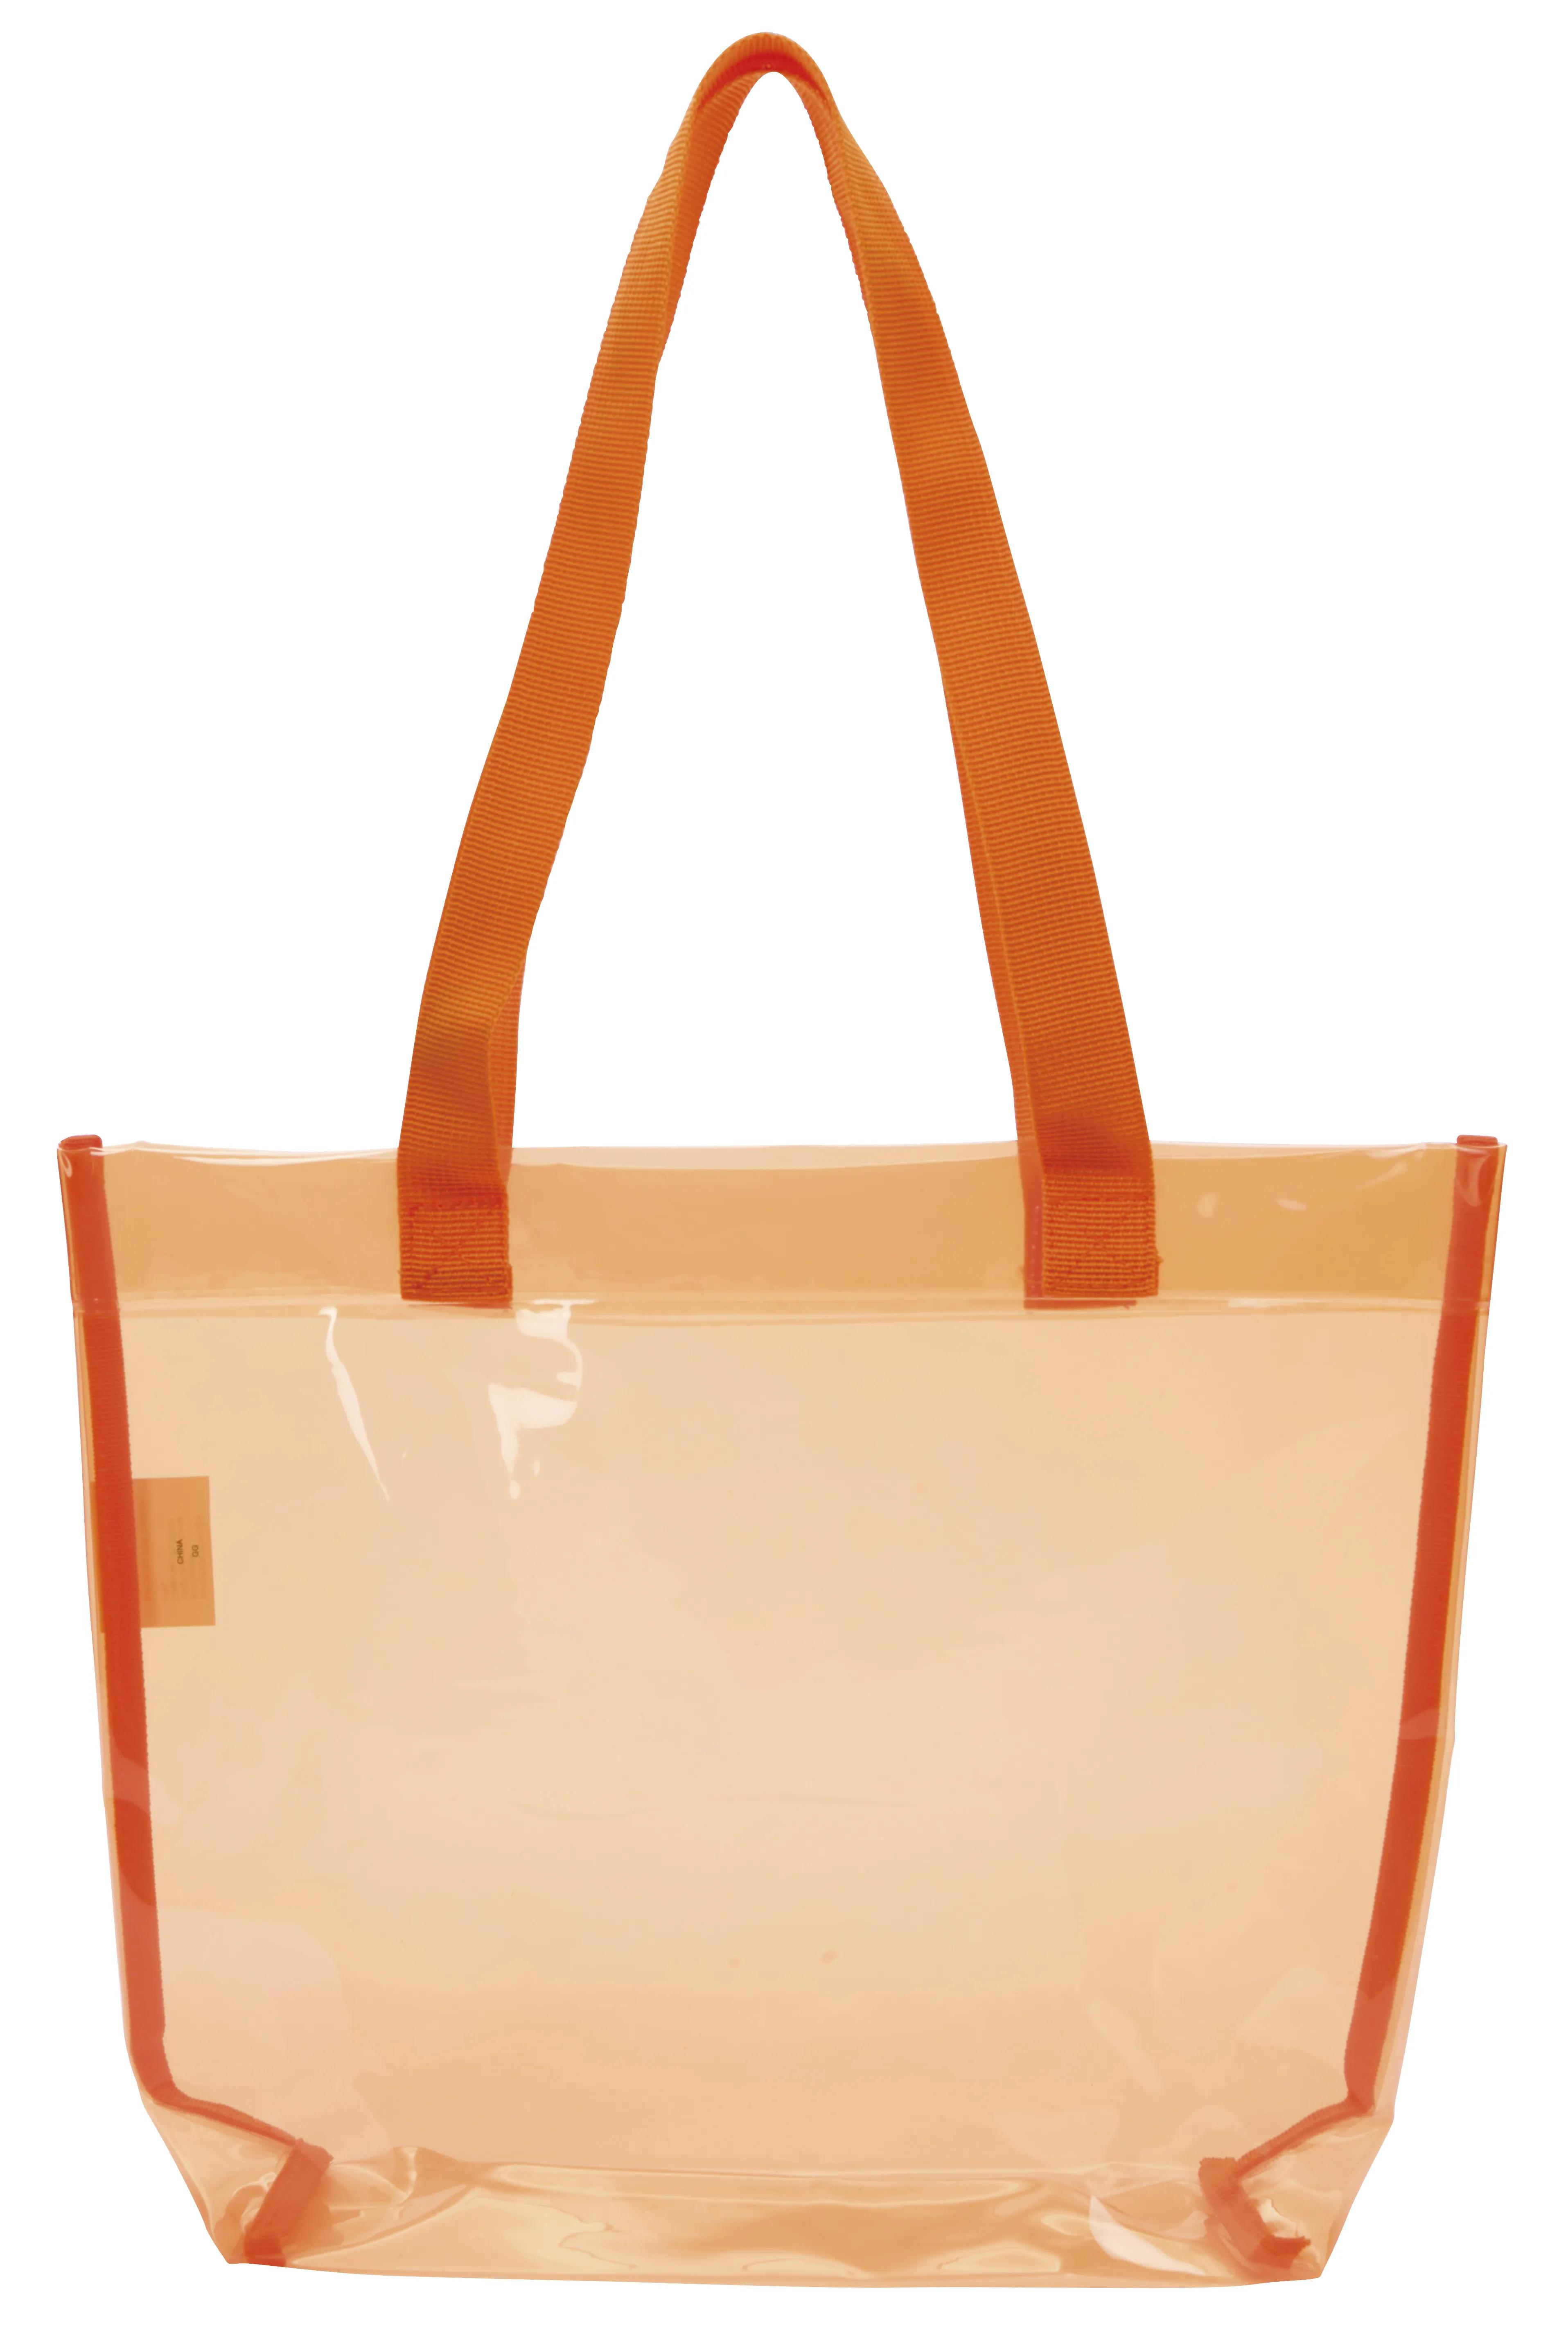 Translucent Color Tote 5 of 13